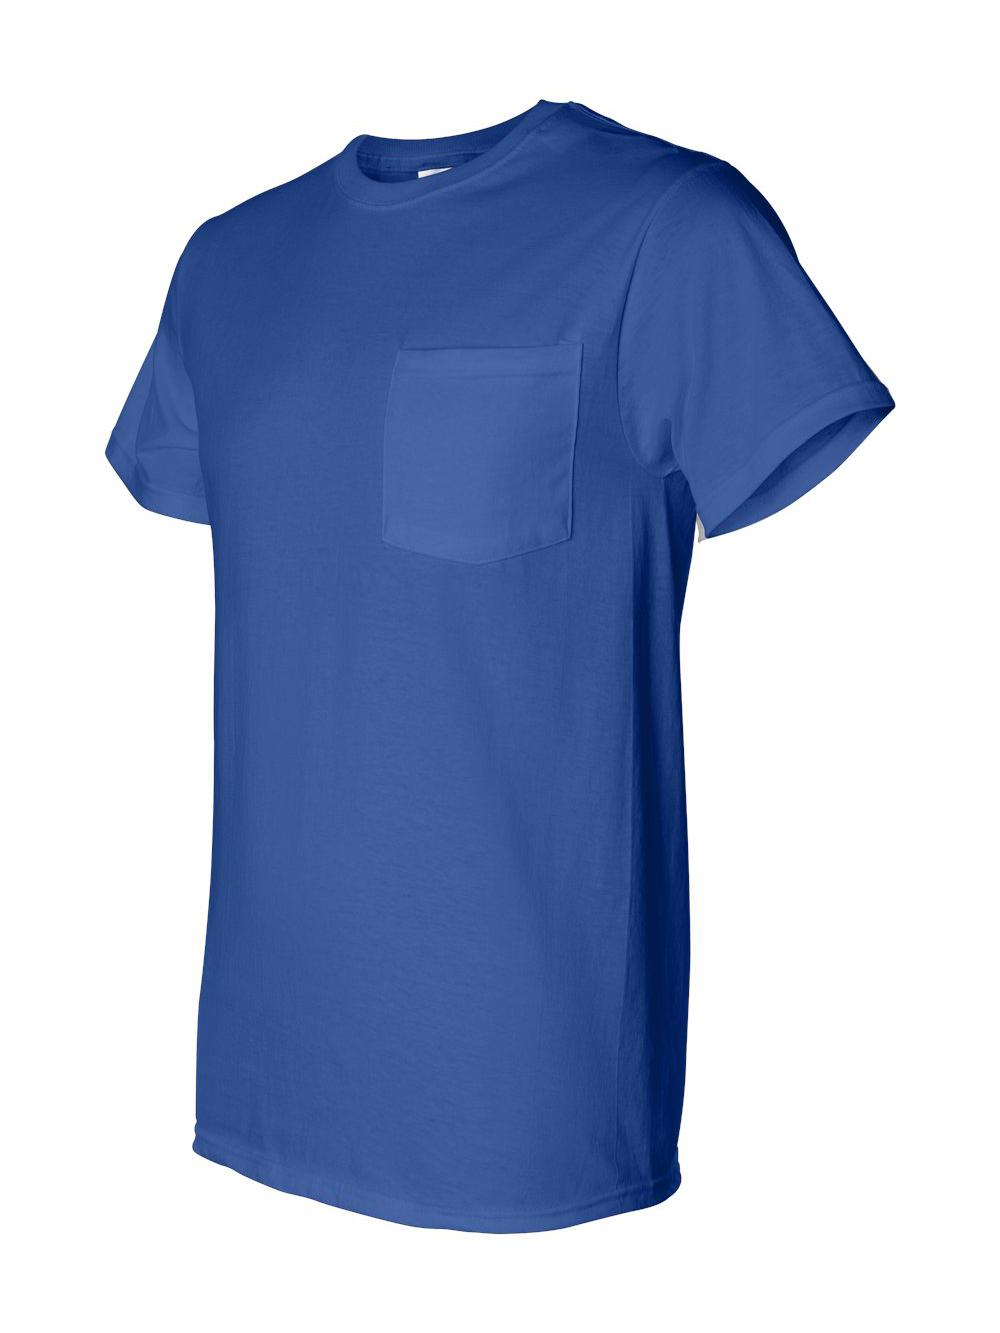 Fruit of the Loom HD Cotton T-Shirt with Pocket for Men - Walmart.com